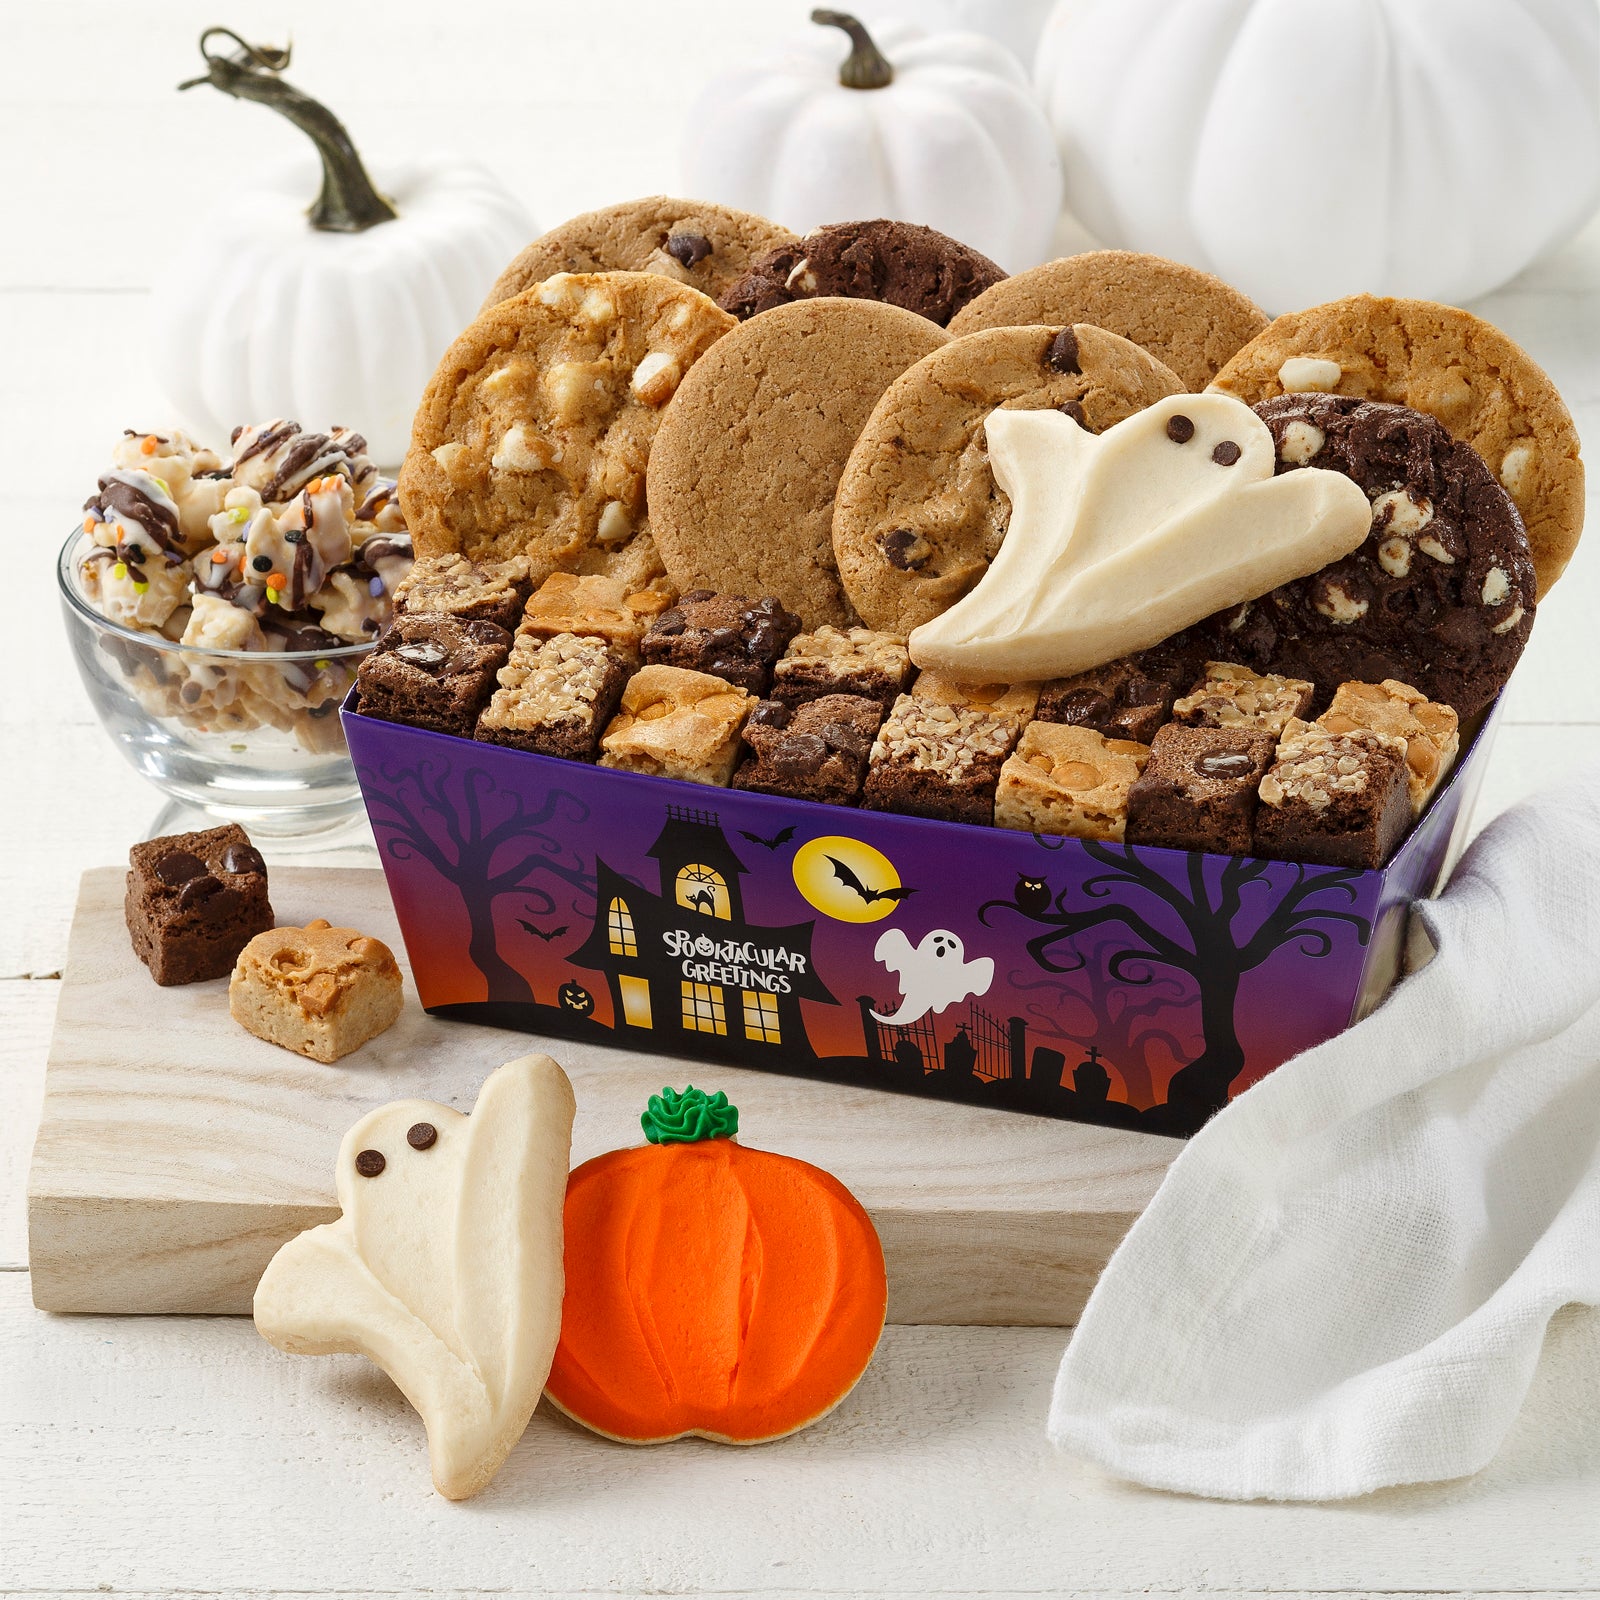 A Halloween themed crate with a spooky haunted house and filled with an assortment of original cookies, brownie bites, two frosted ghosts, and one frosted pumpkin cookie